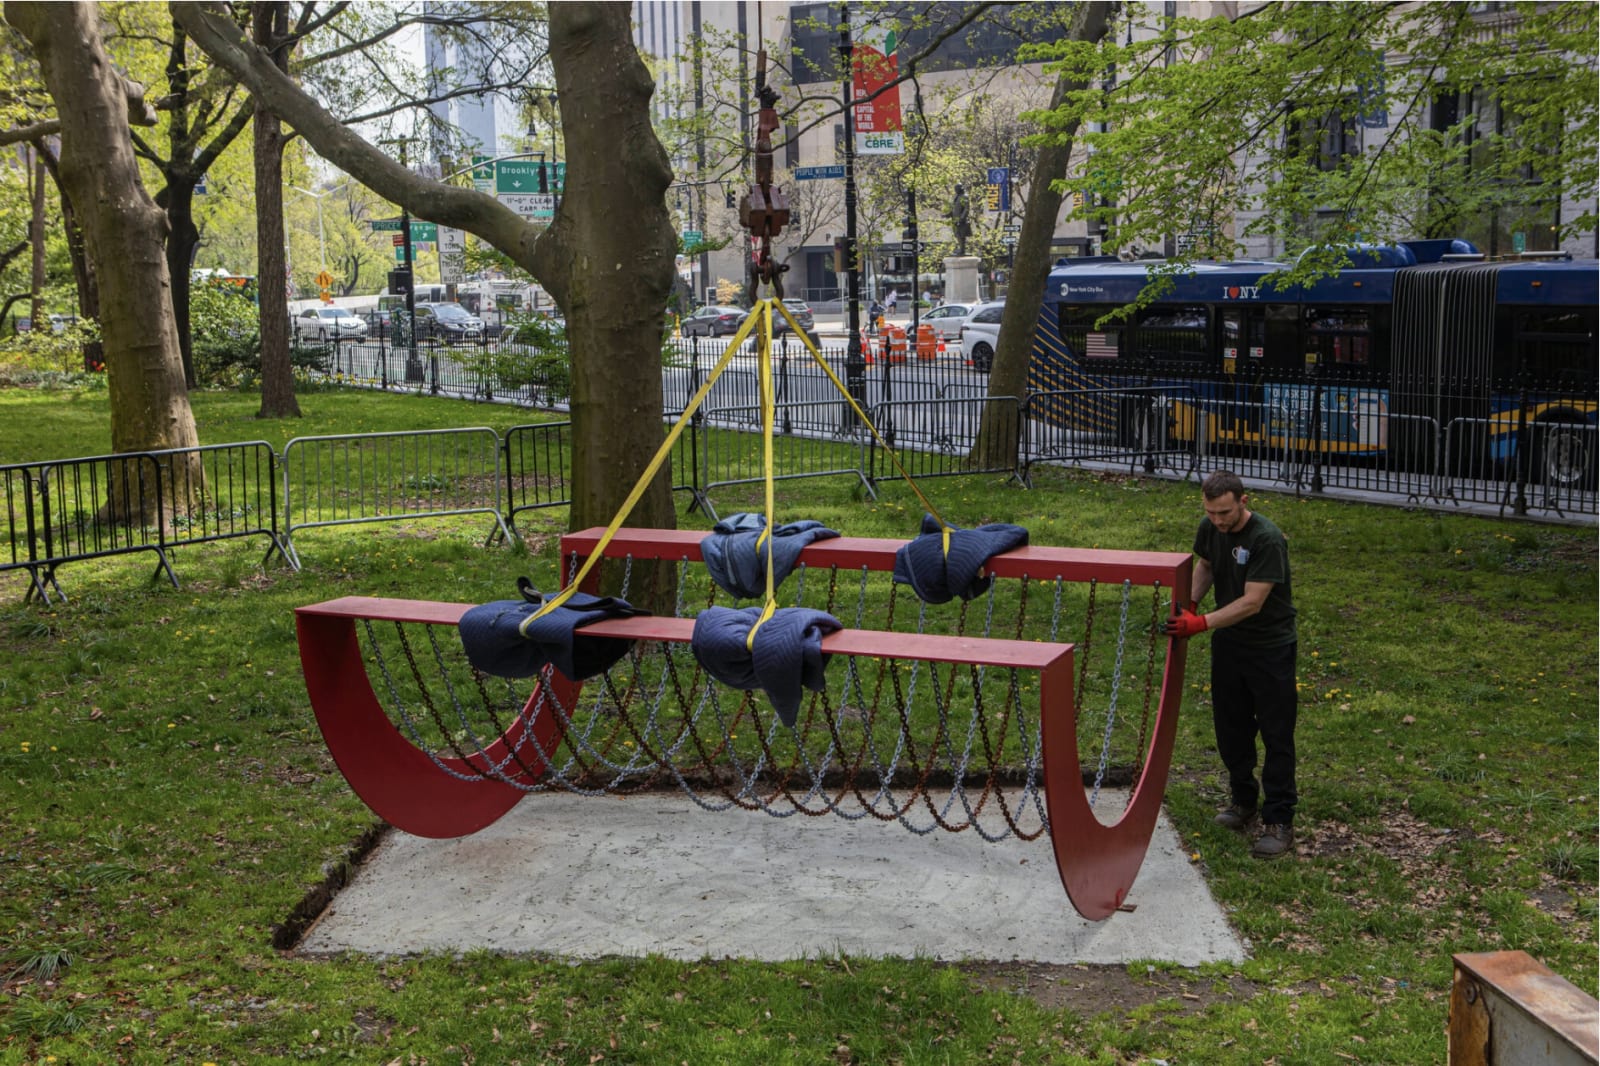 <div class="additional_caption">'Homage to Coco' being installed in Manhattan. Hiroko Masuike/ The New York Times </div>